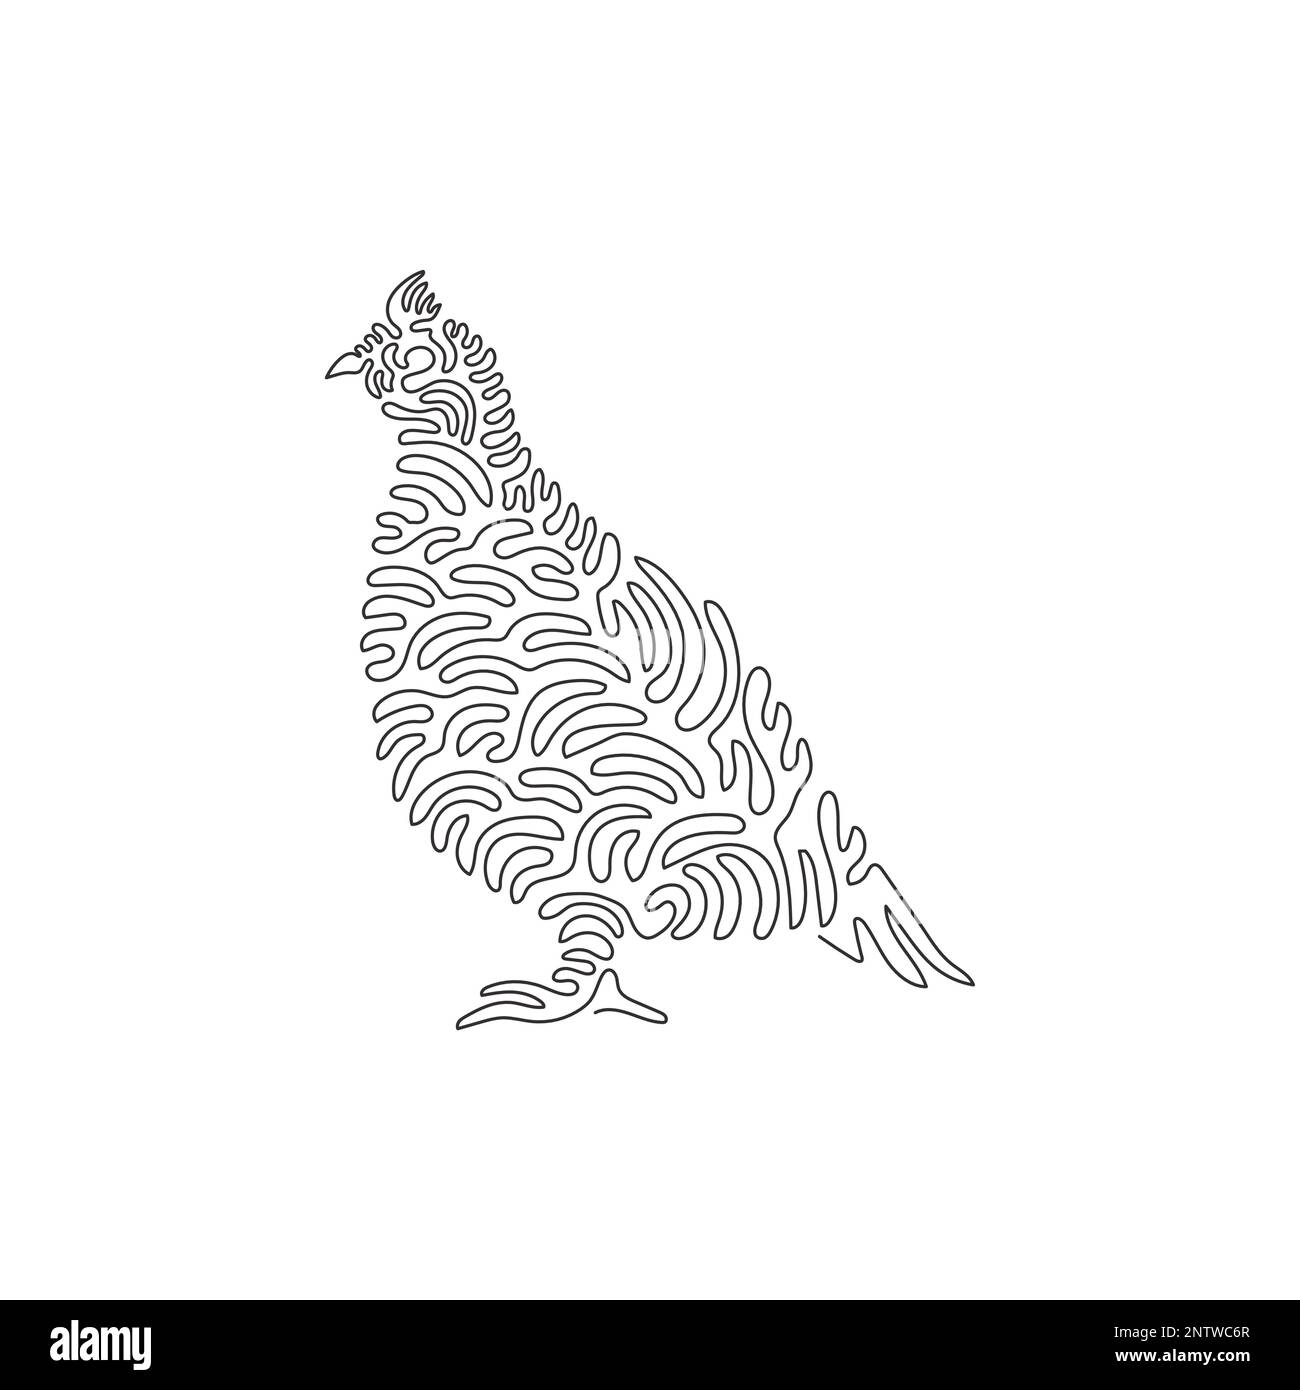 Single one line drawing of stocky grouse abstract art. Continuous line draw graphic design vector illustration of beautiful grouse for icon, symbol Stock Vector